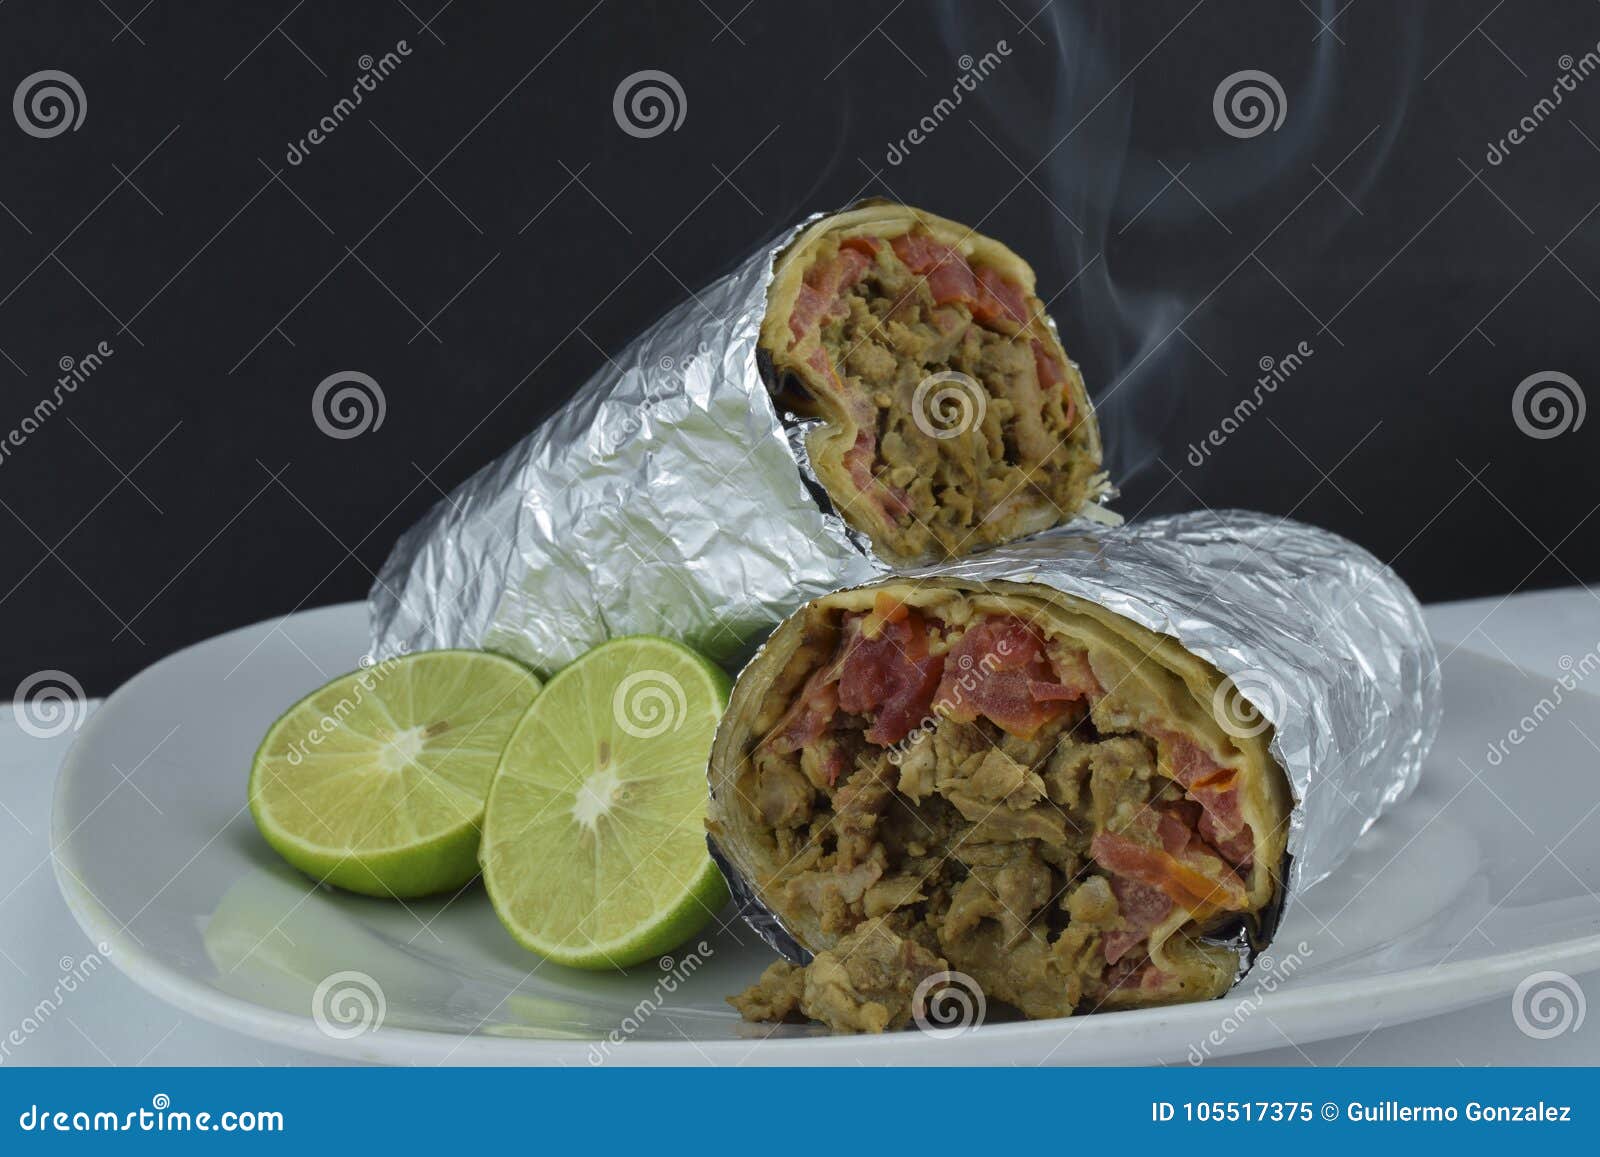 mexican wrapped burrito and lemon